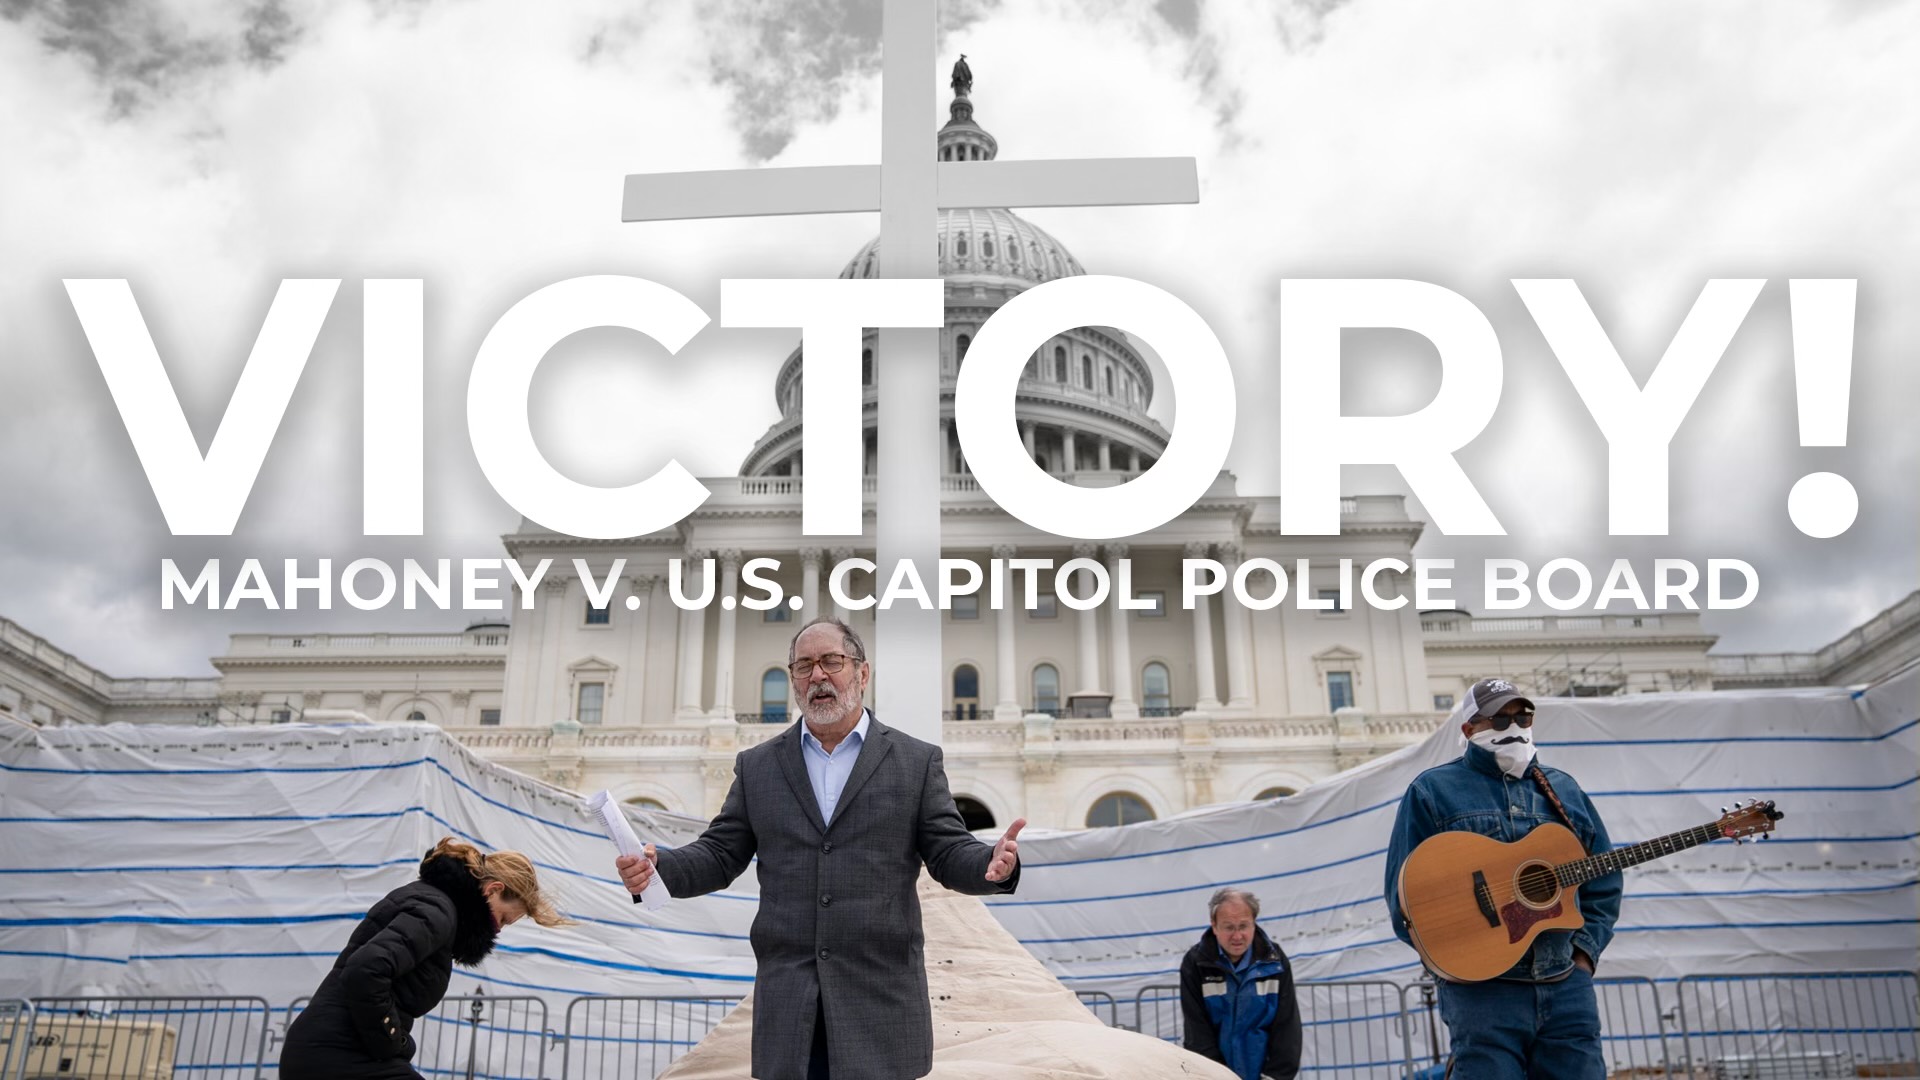 Victory for Free Speech! Federal Court Rules in Favor of Rev. Mahoney’s Right to Pray on US Capitol Steps